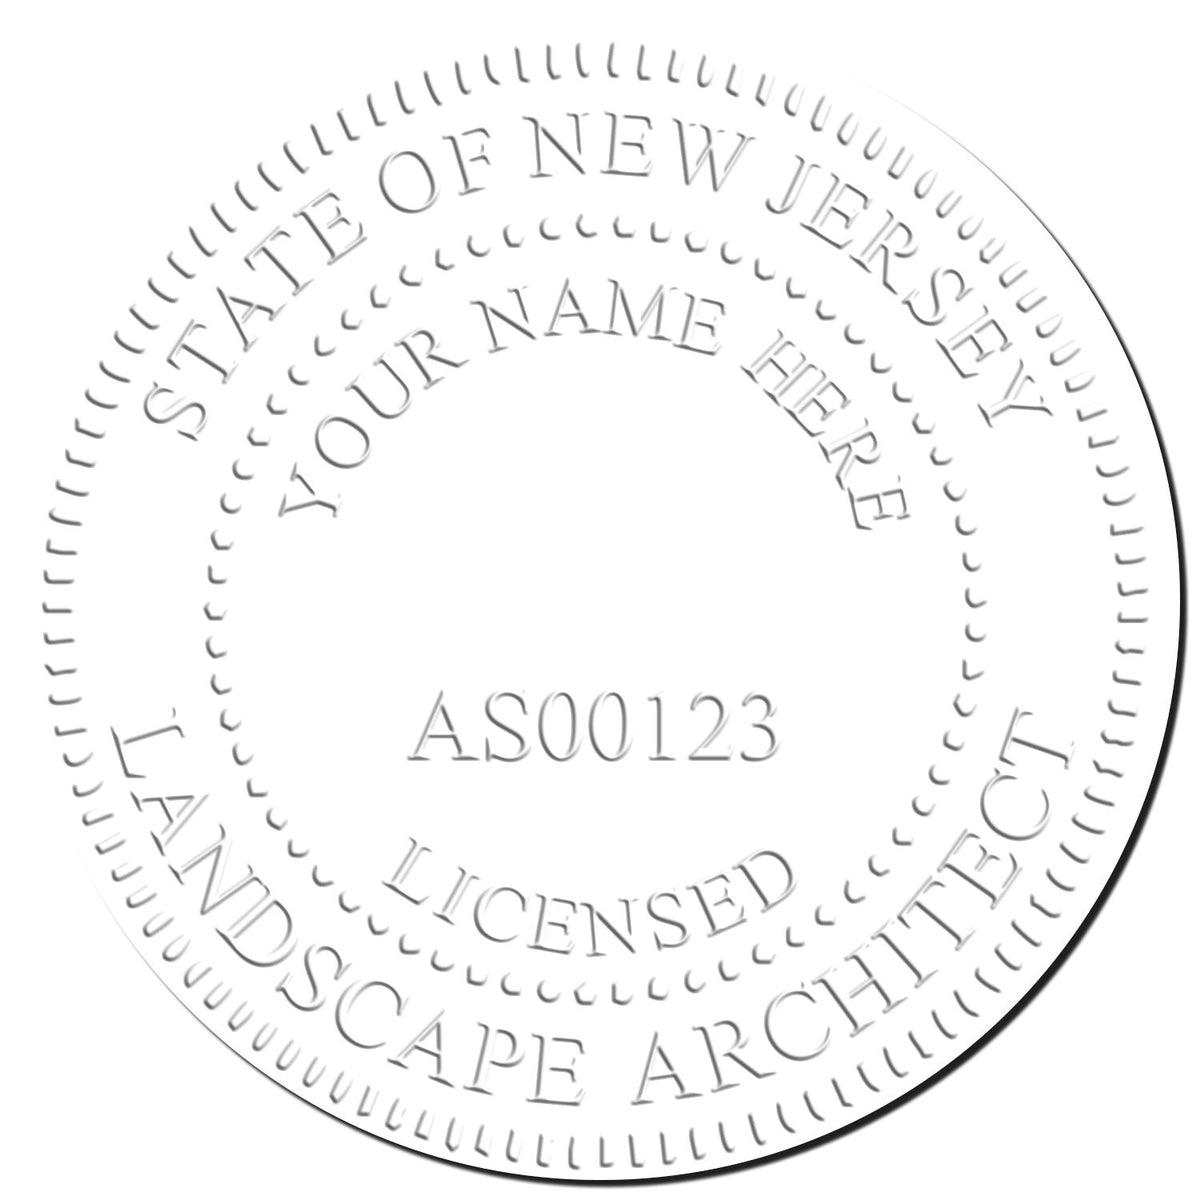 This paper is stamped with a sample imprint of the Hybrid New Jersey Landscape Architect Seal, signifying its quality and reliability.